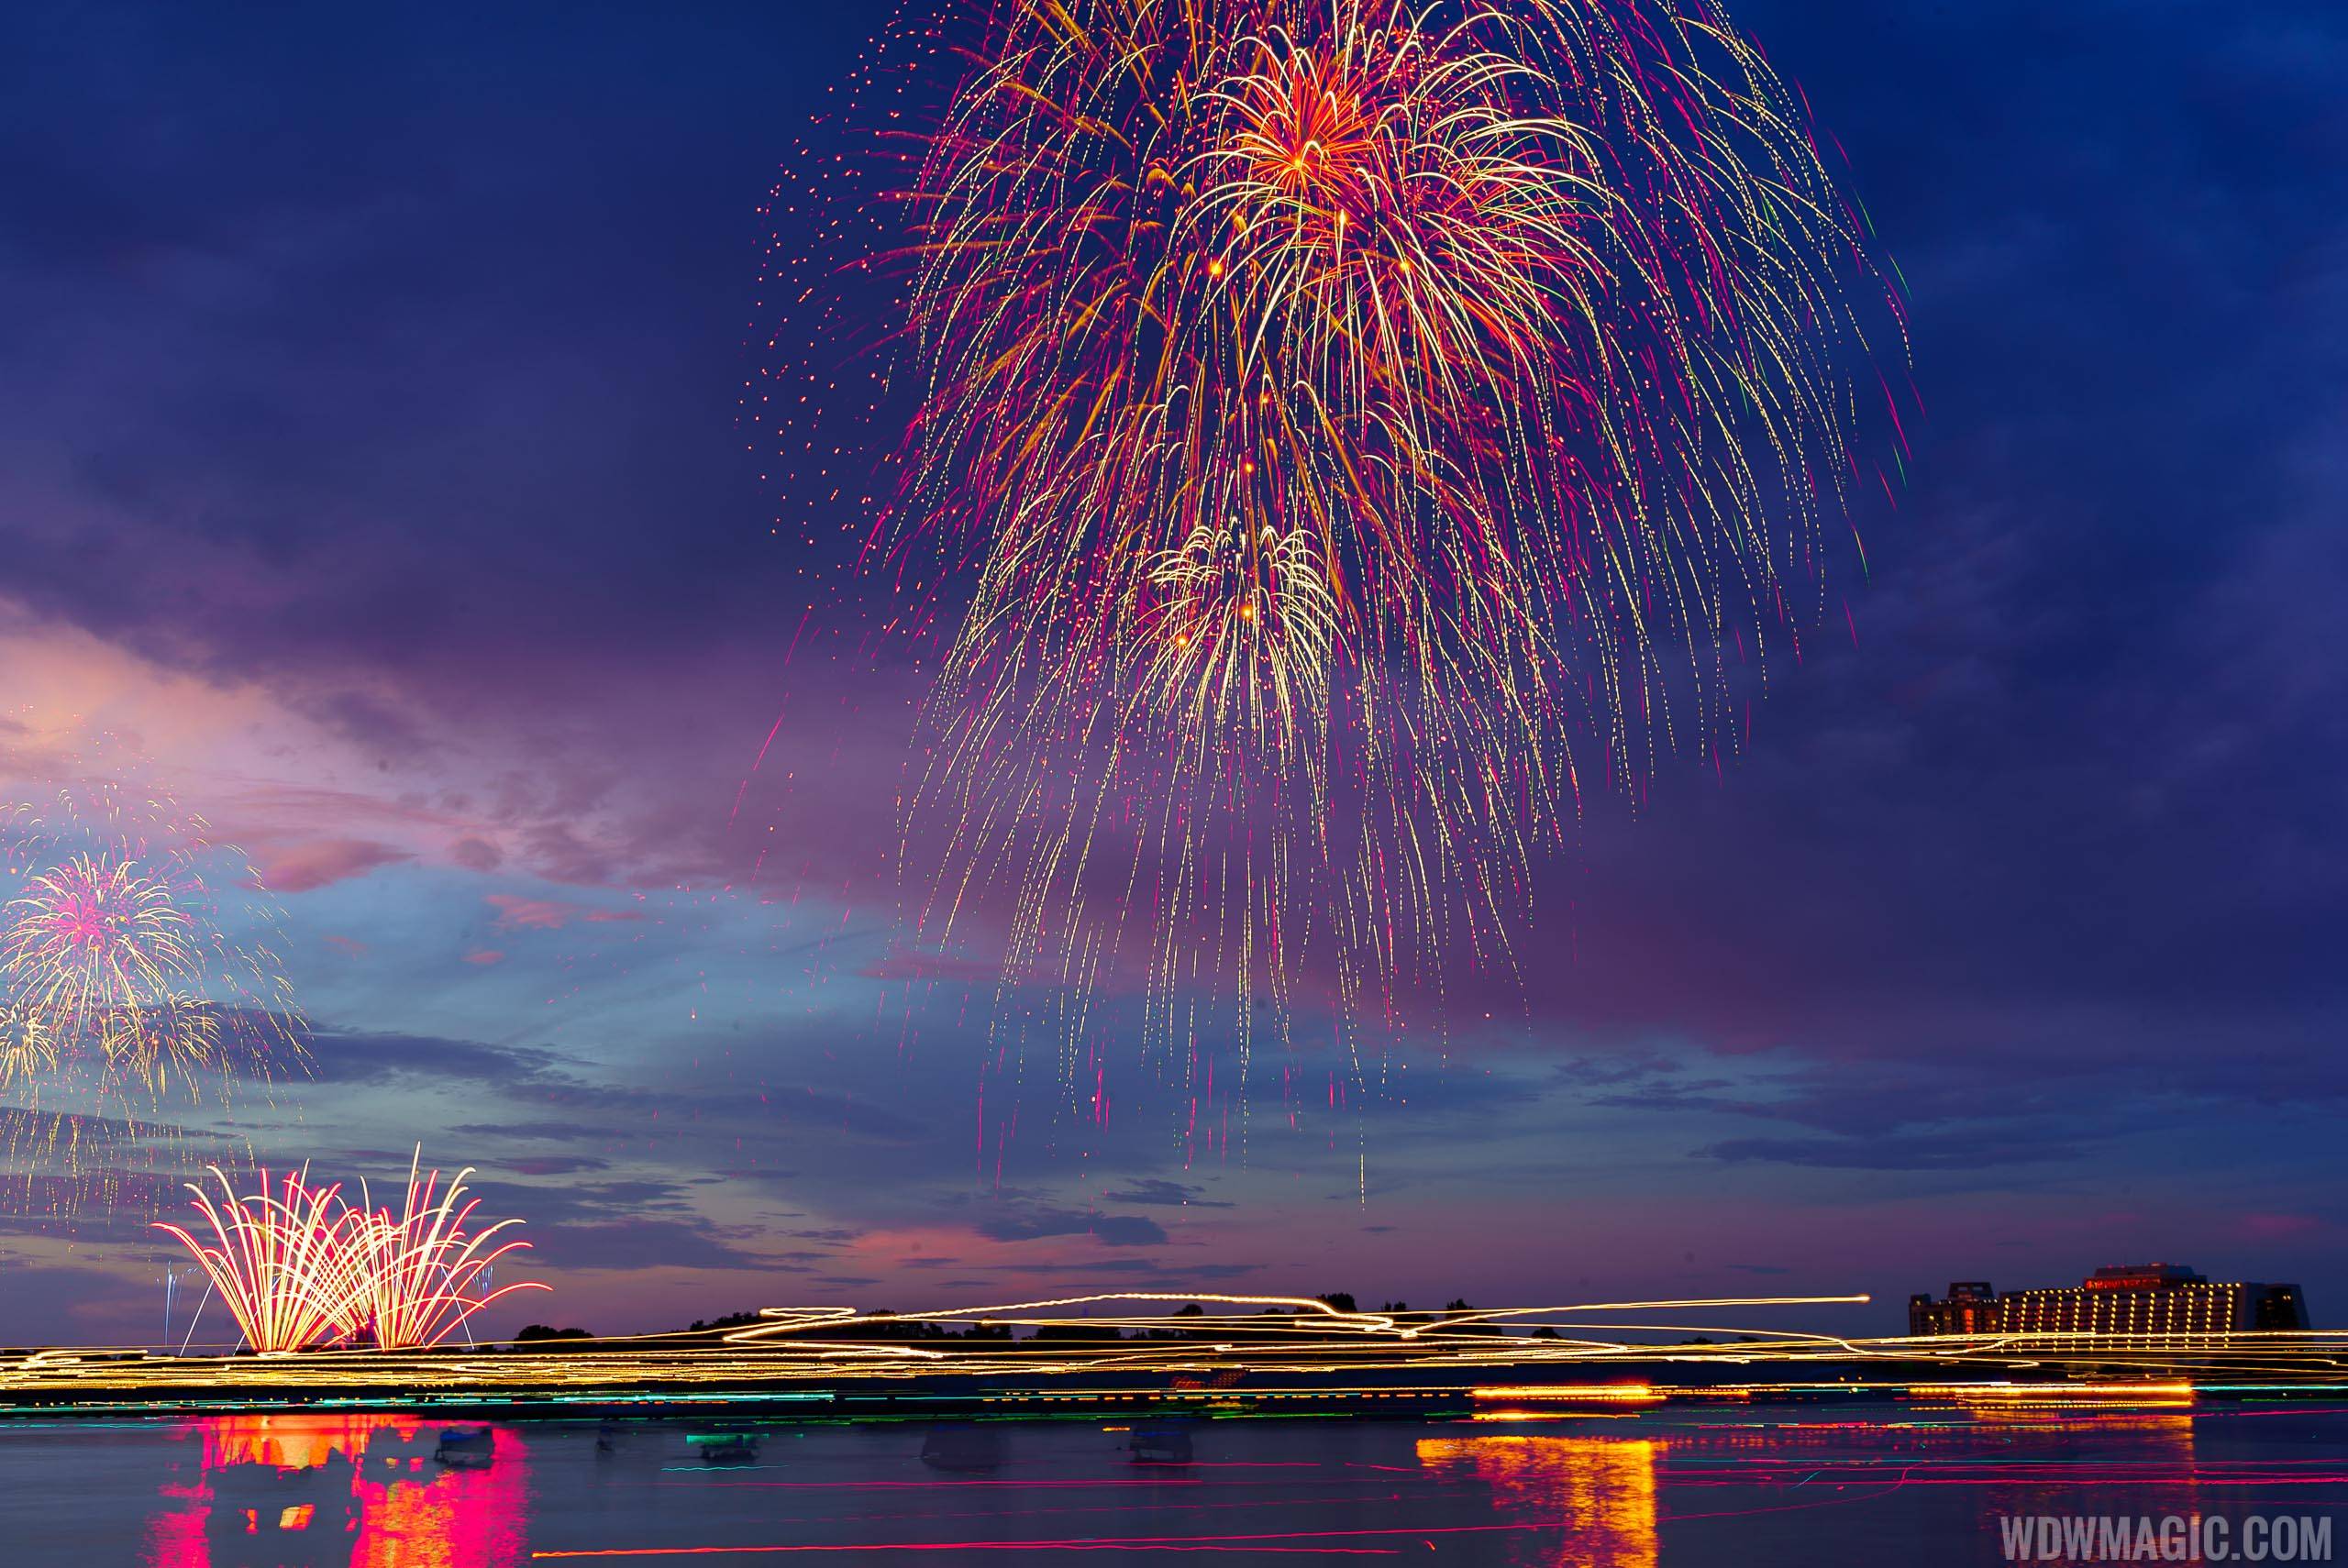 Disney's Celebrate America! - A Fourth of July Concert in the Sky returns to Walt Disney World's Magic Kingdom for 2022